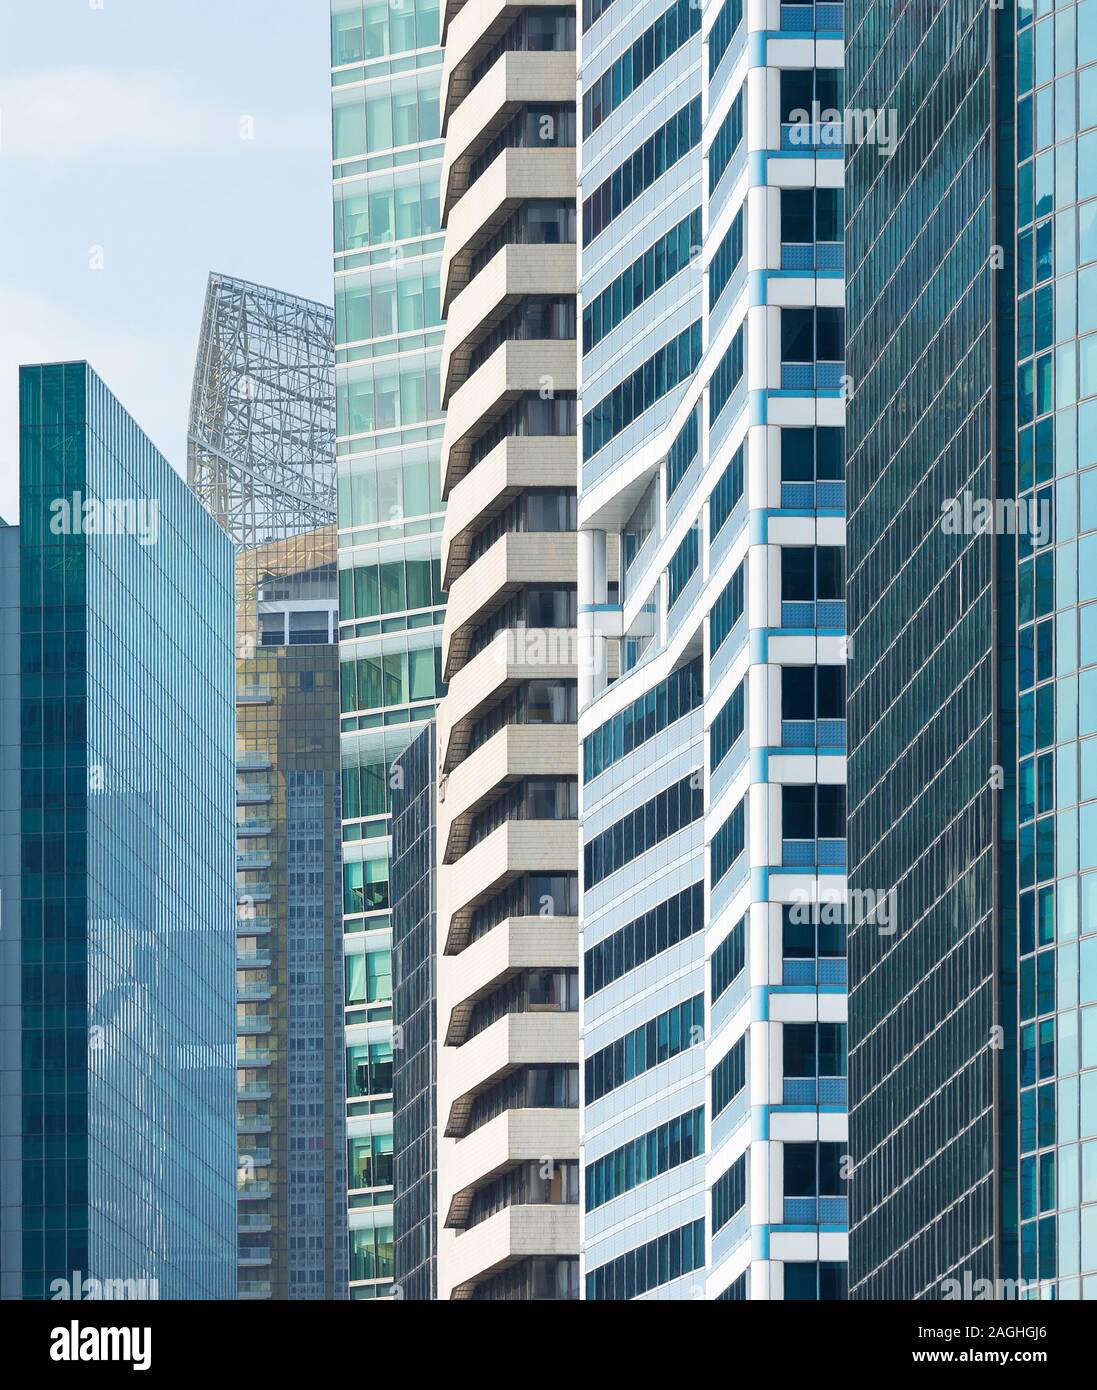 Singapore architecture, cityscape with skyscrapers glass facades, business and finance metropolis theme Stock Photo